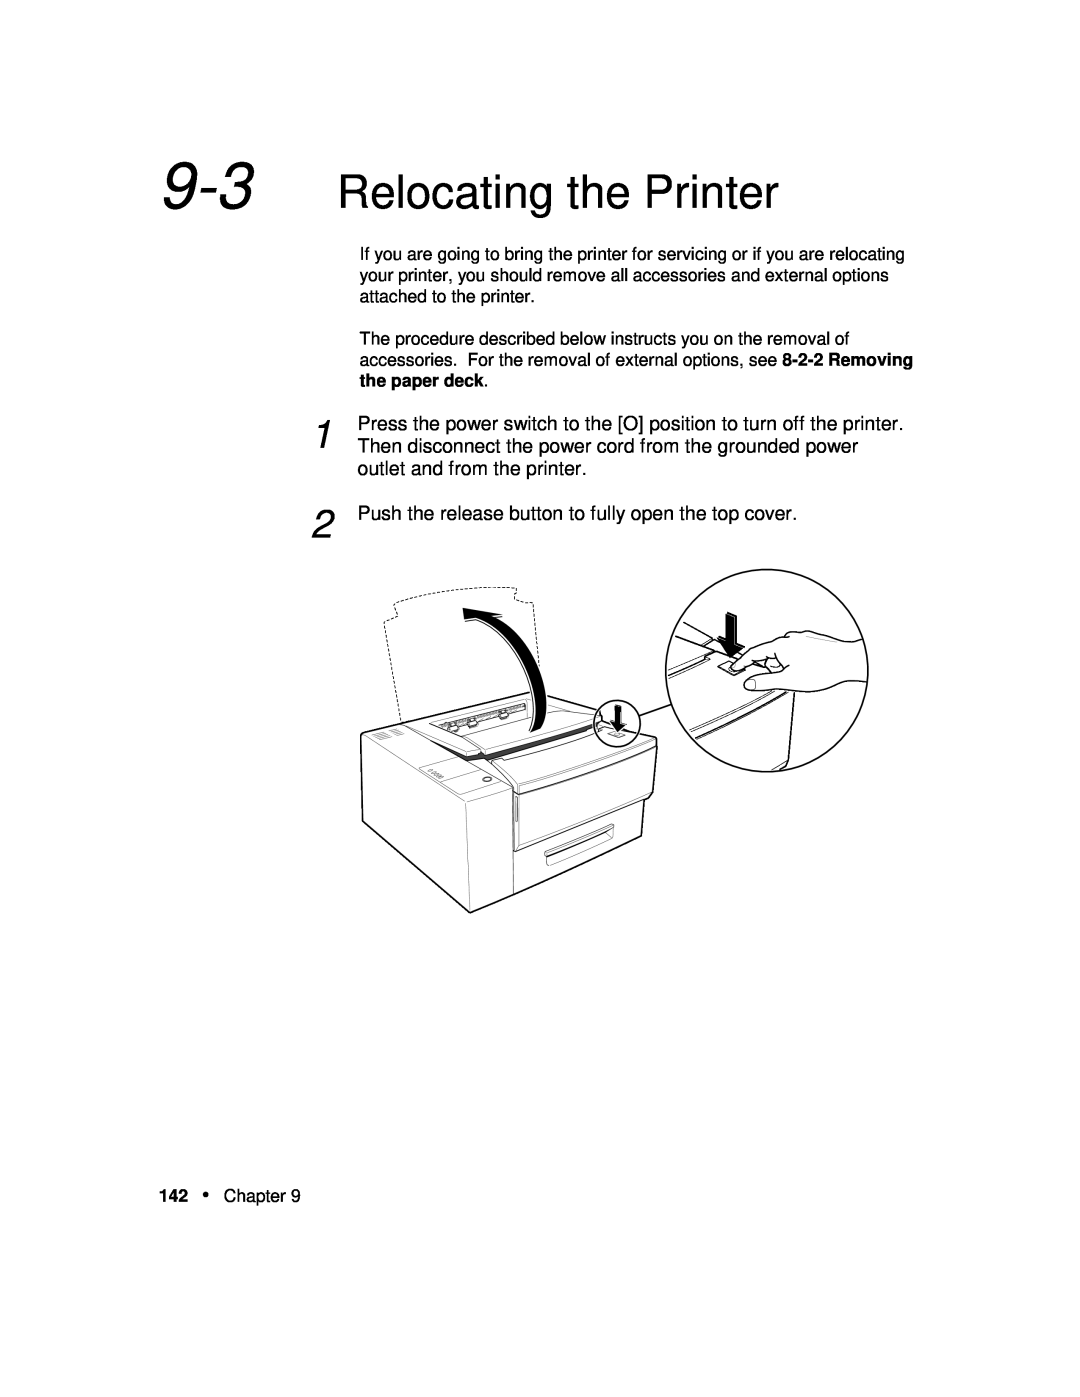 Xerox P12 manual Relocating the Printer, the paper deck, Press the power switch to the O position to turn off the printer 